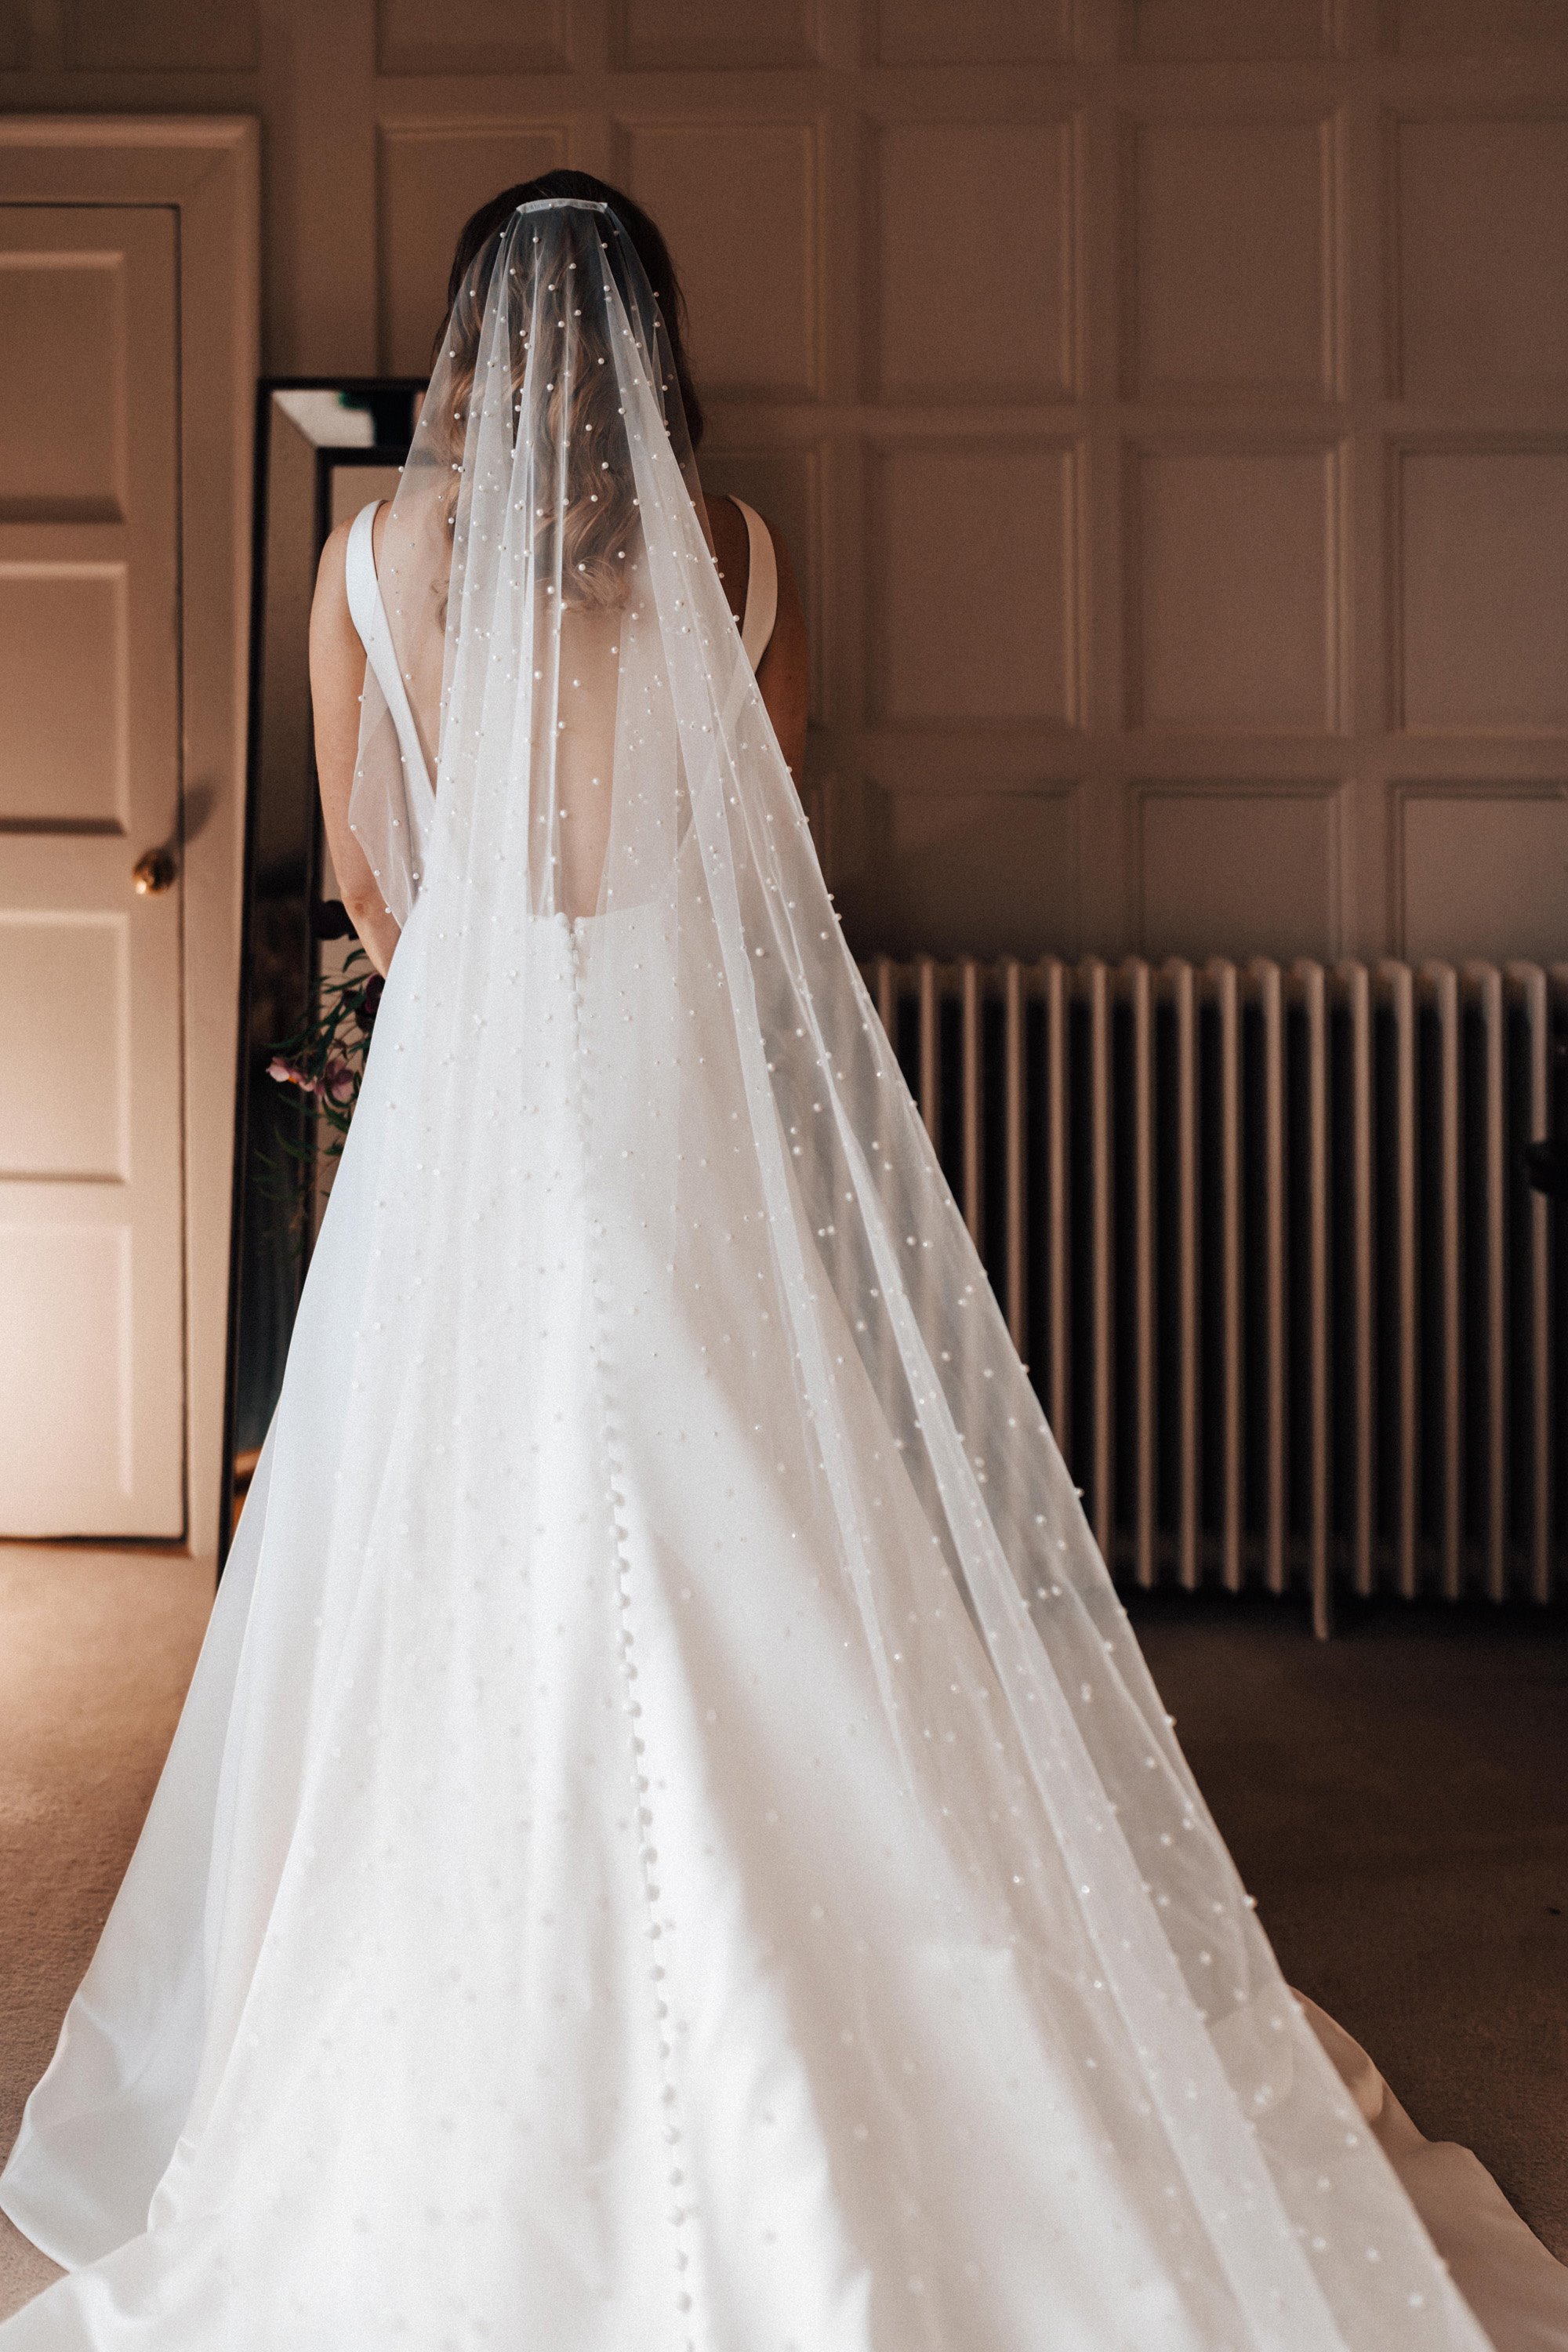 Bride in full length cathedral veil with pearls for a romantic autumn wedding with dark vibes in october